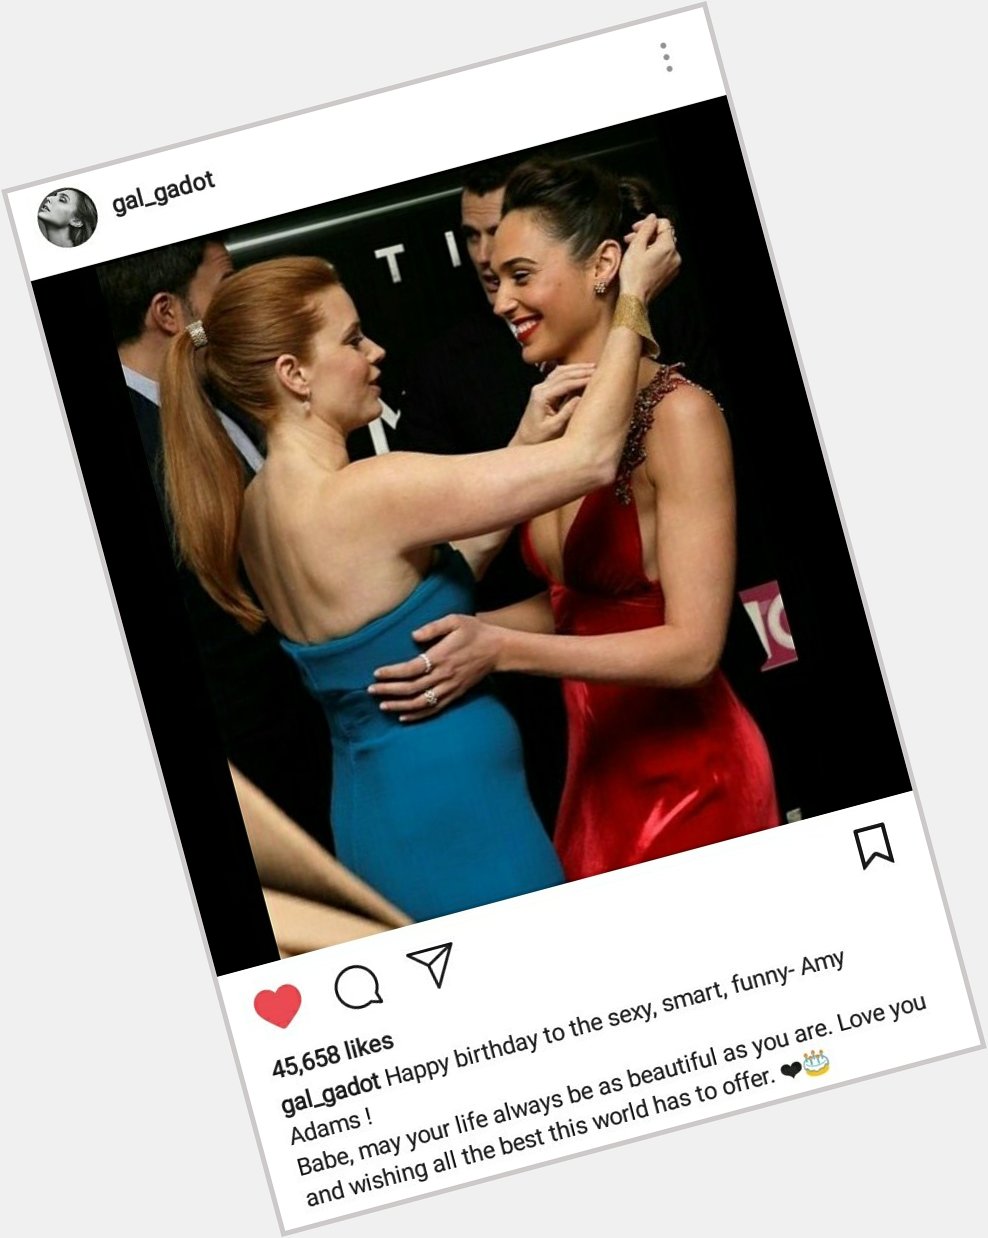 Gal greeting \"sexy, smart, funny Amy Adams\" a happy birthday. I LOVE MY MOTHERS. 